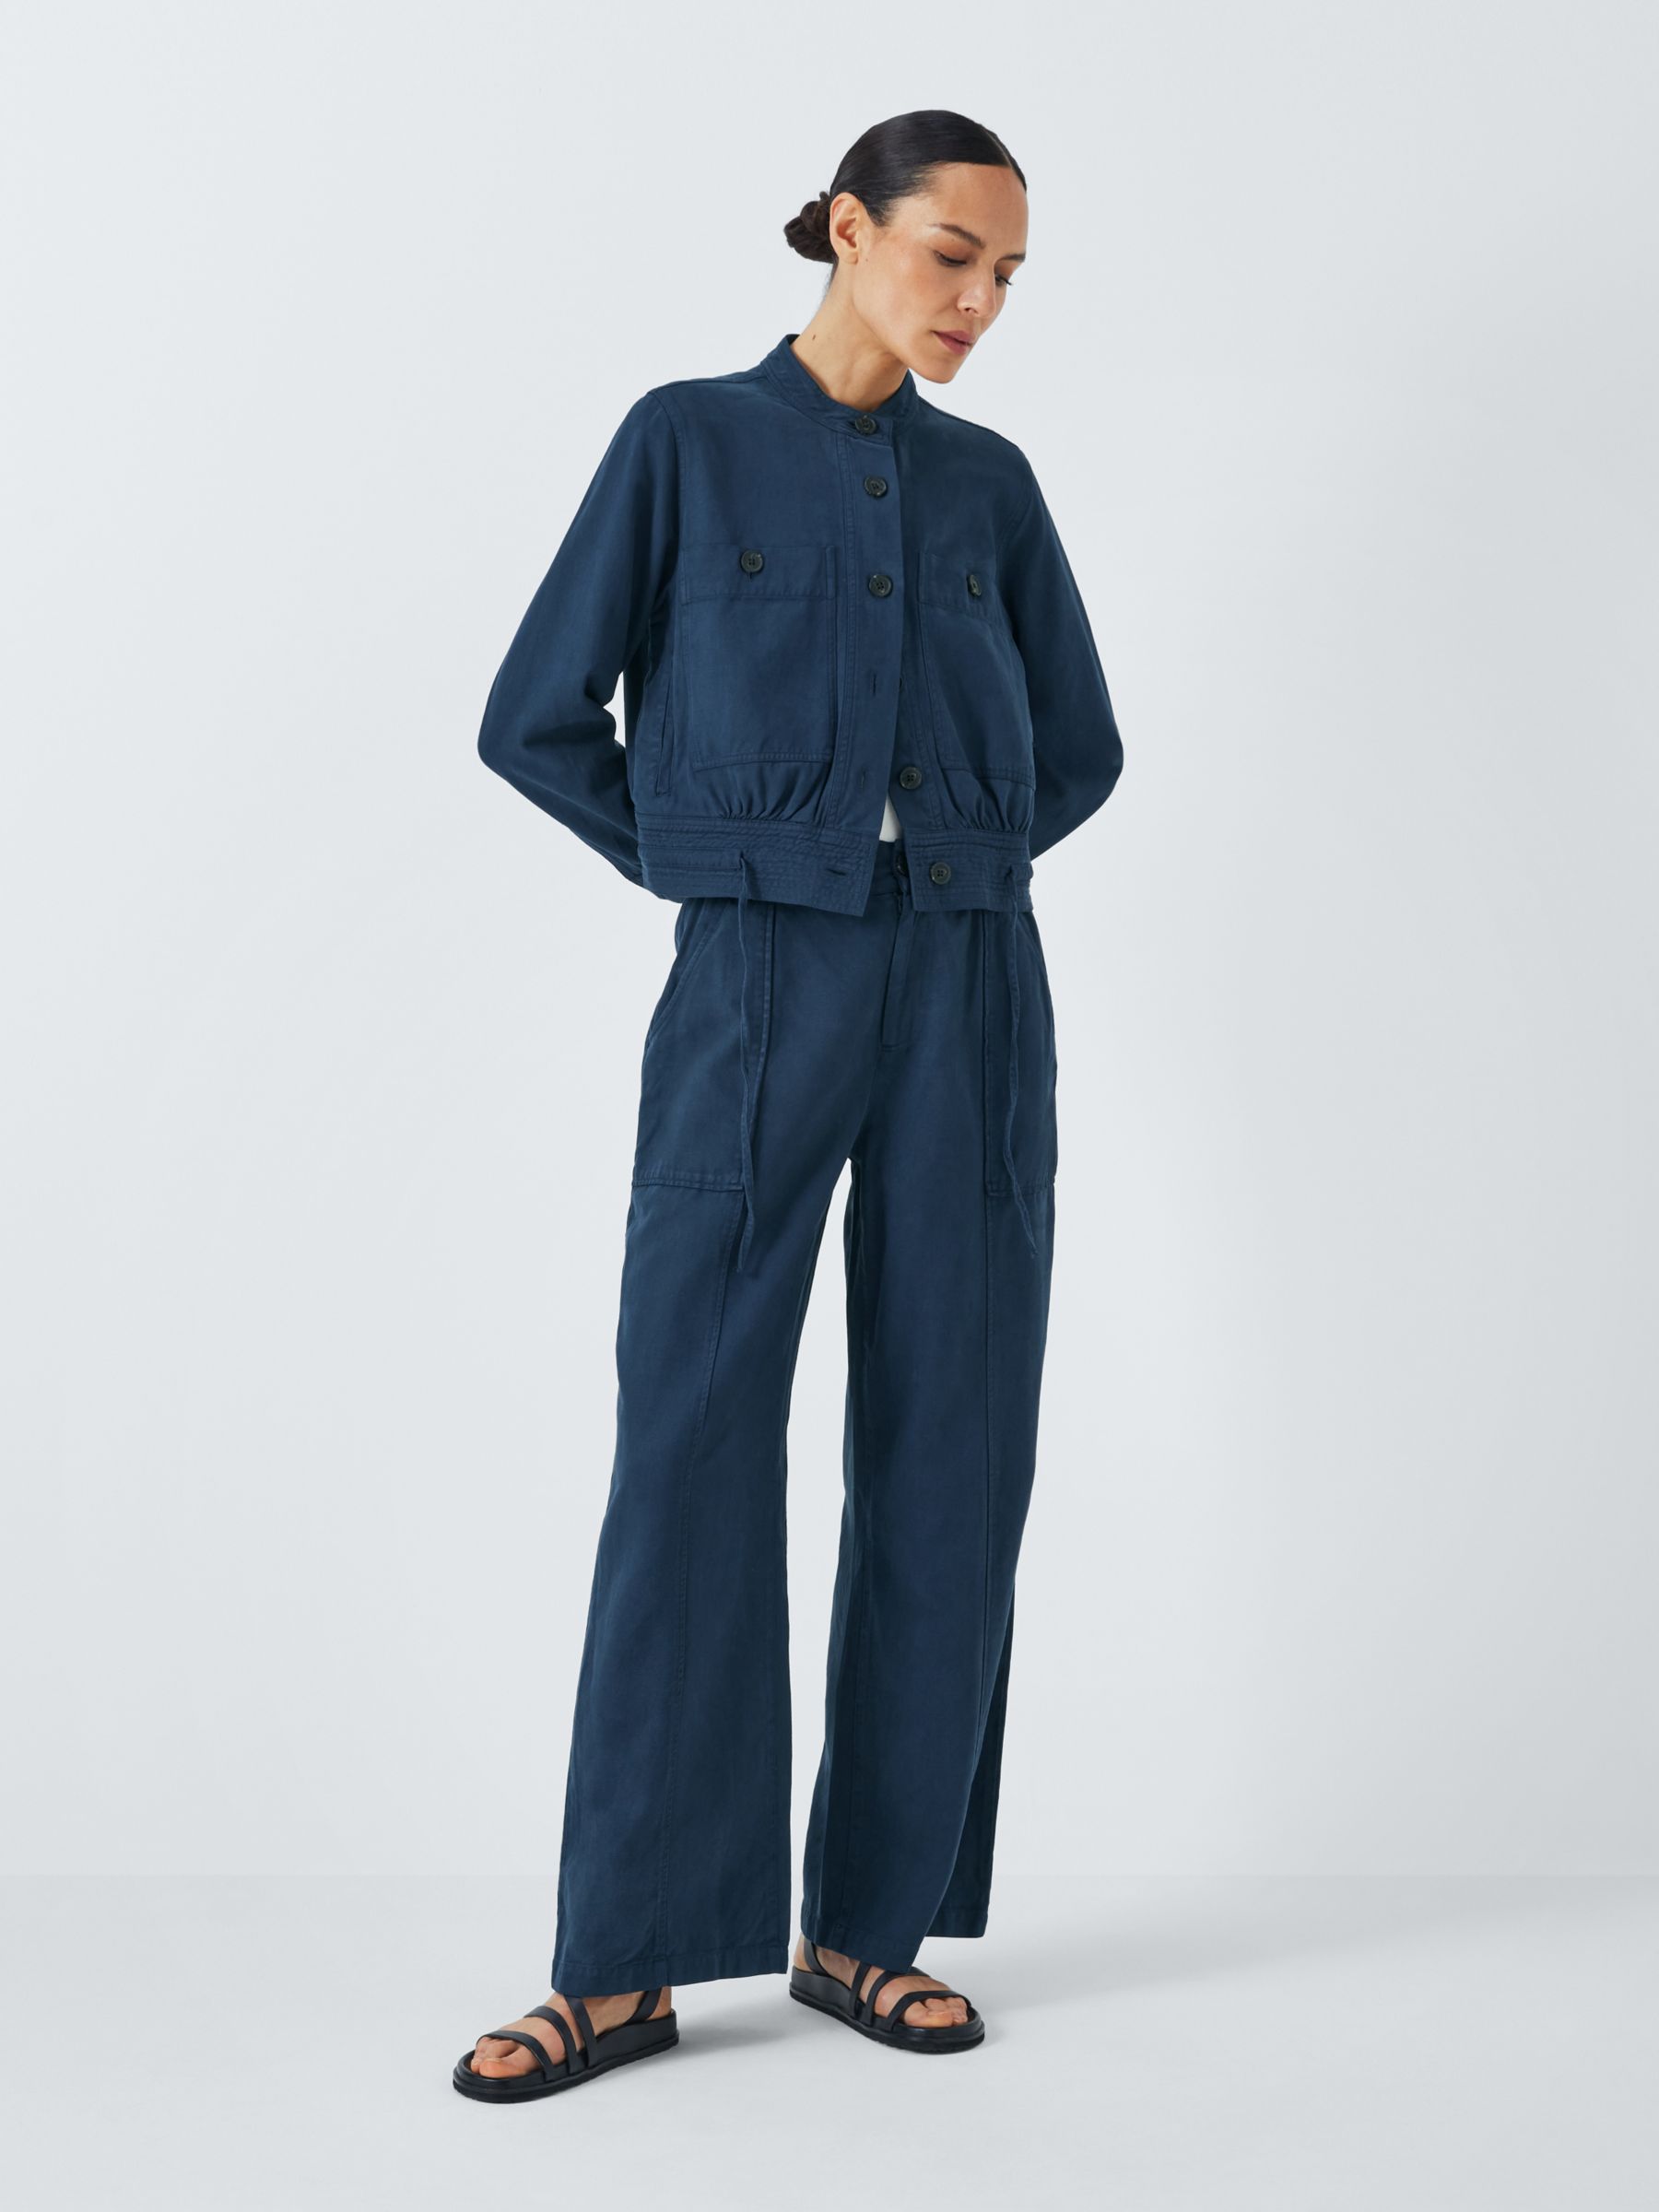 Rails Greer Vintage Twill Trousers, Navy, M